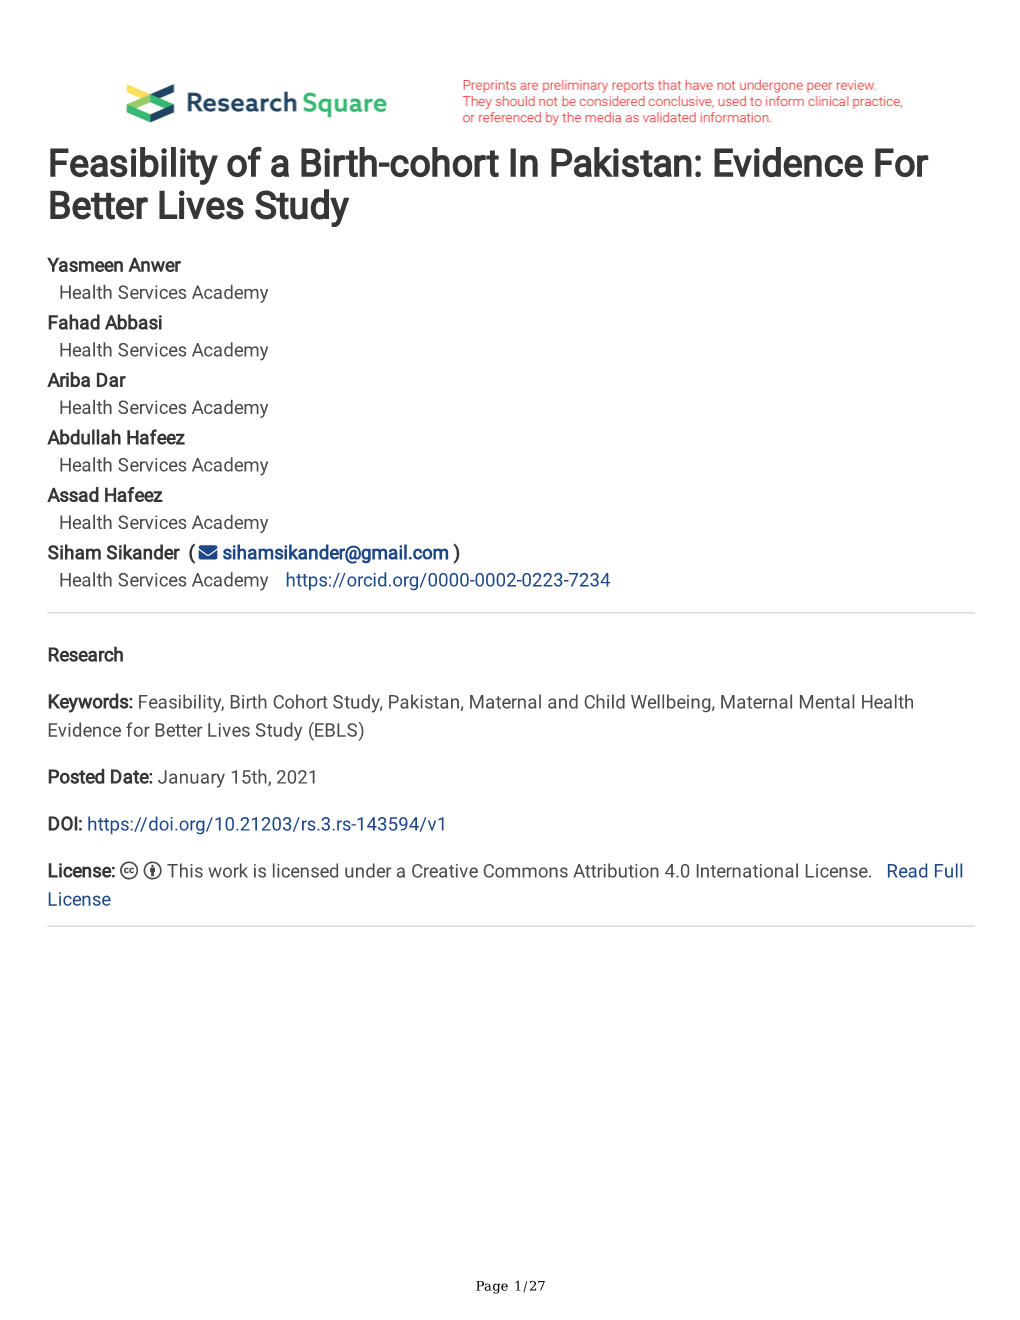 Feasibility of a Birth-Cohort in Pakistan: Evidence for Better Lives Study